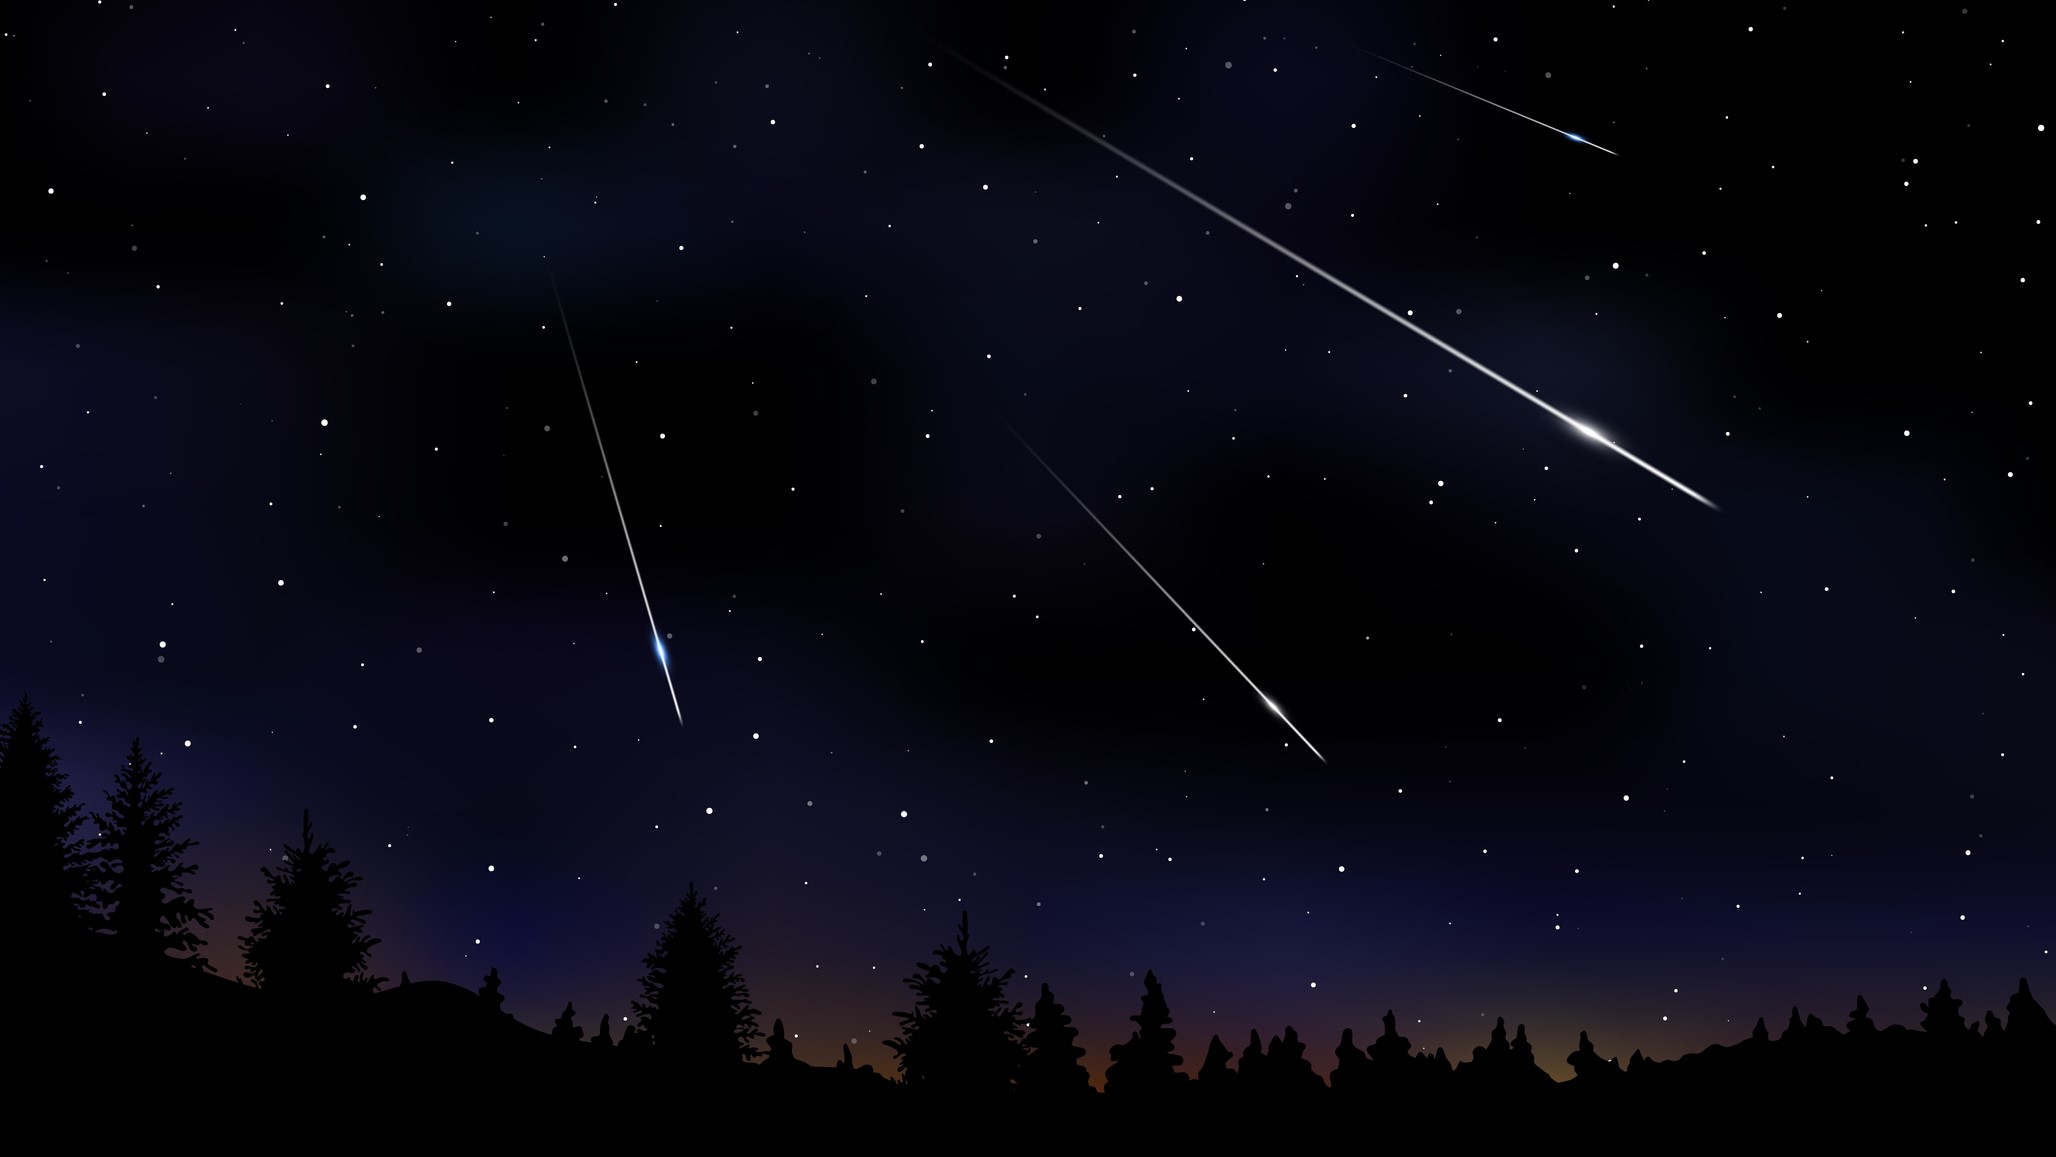 An illustration of meteor showers in the sky